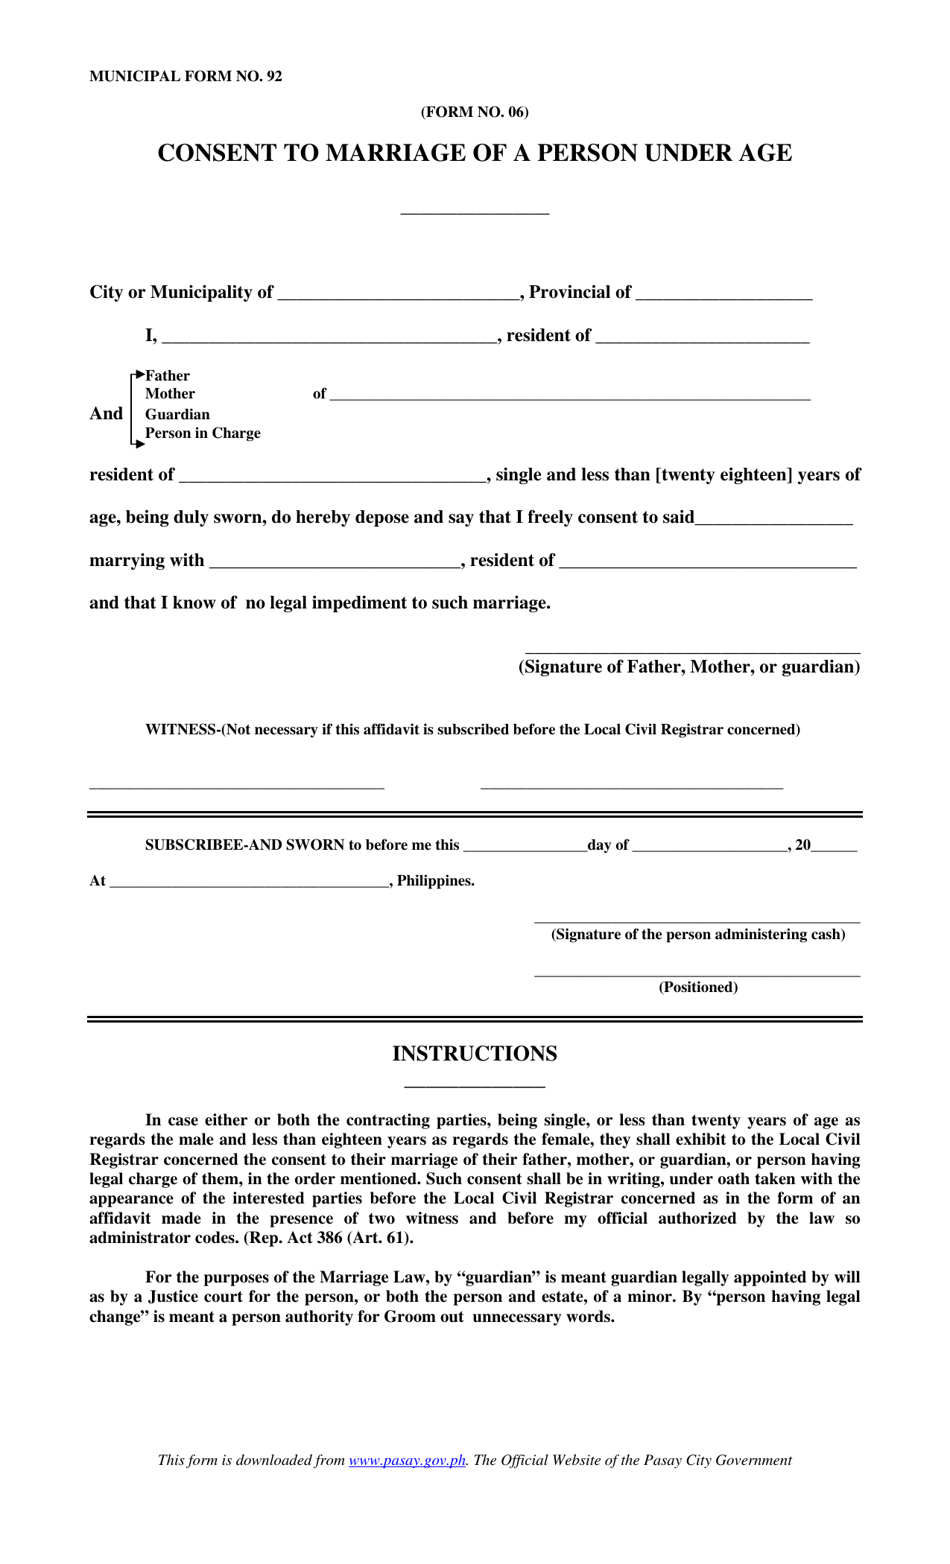 Form 06 (Municipal Form 92) Consent to Marriage of a Person Under Age - City of Pasay, National Capital Region, Philippines, Page 1